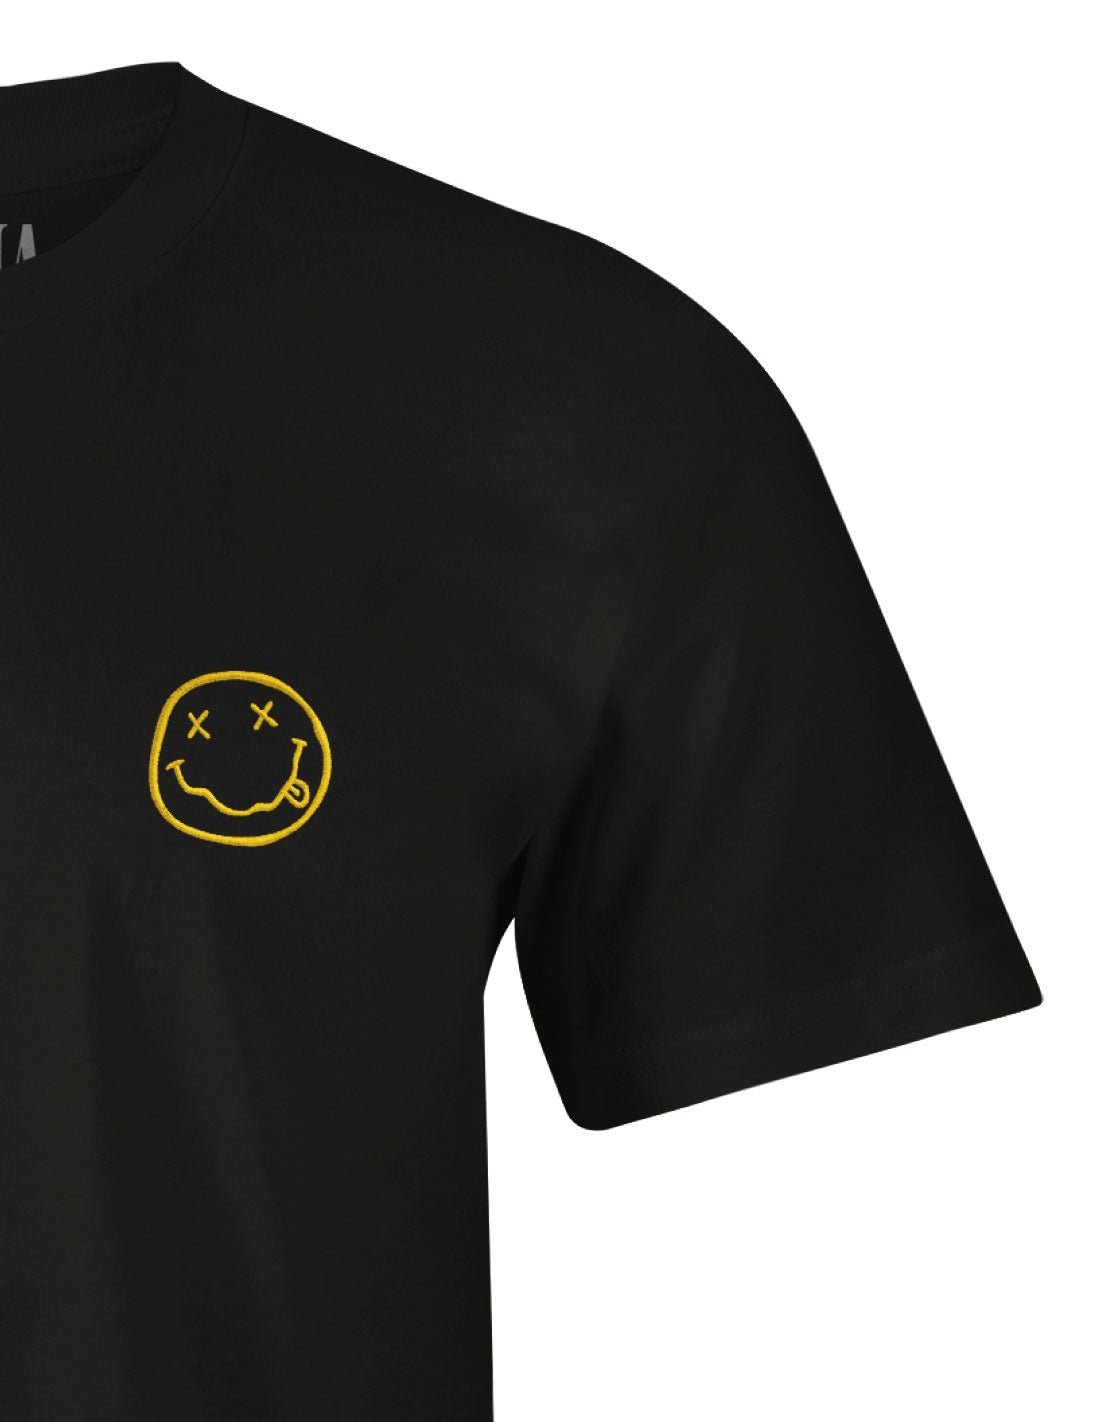 NIRVANA Embroidered T-shirt - Smiley